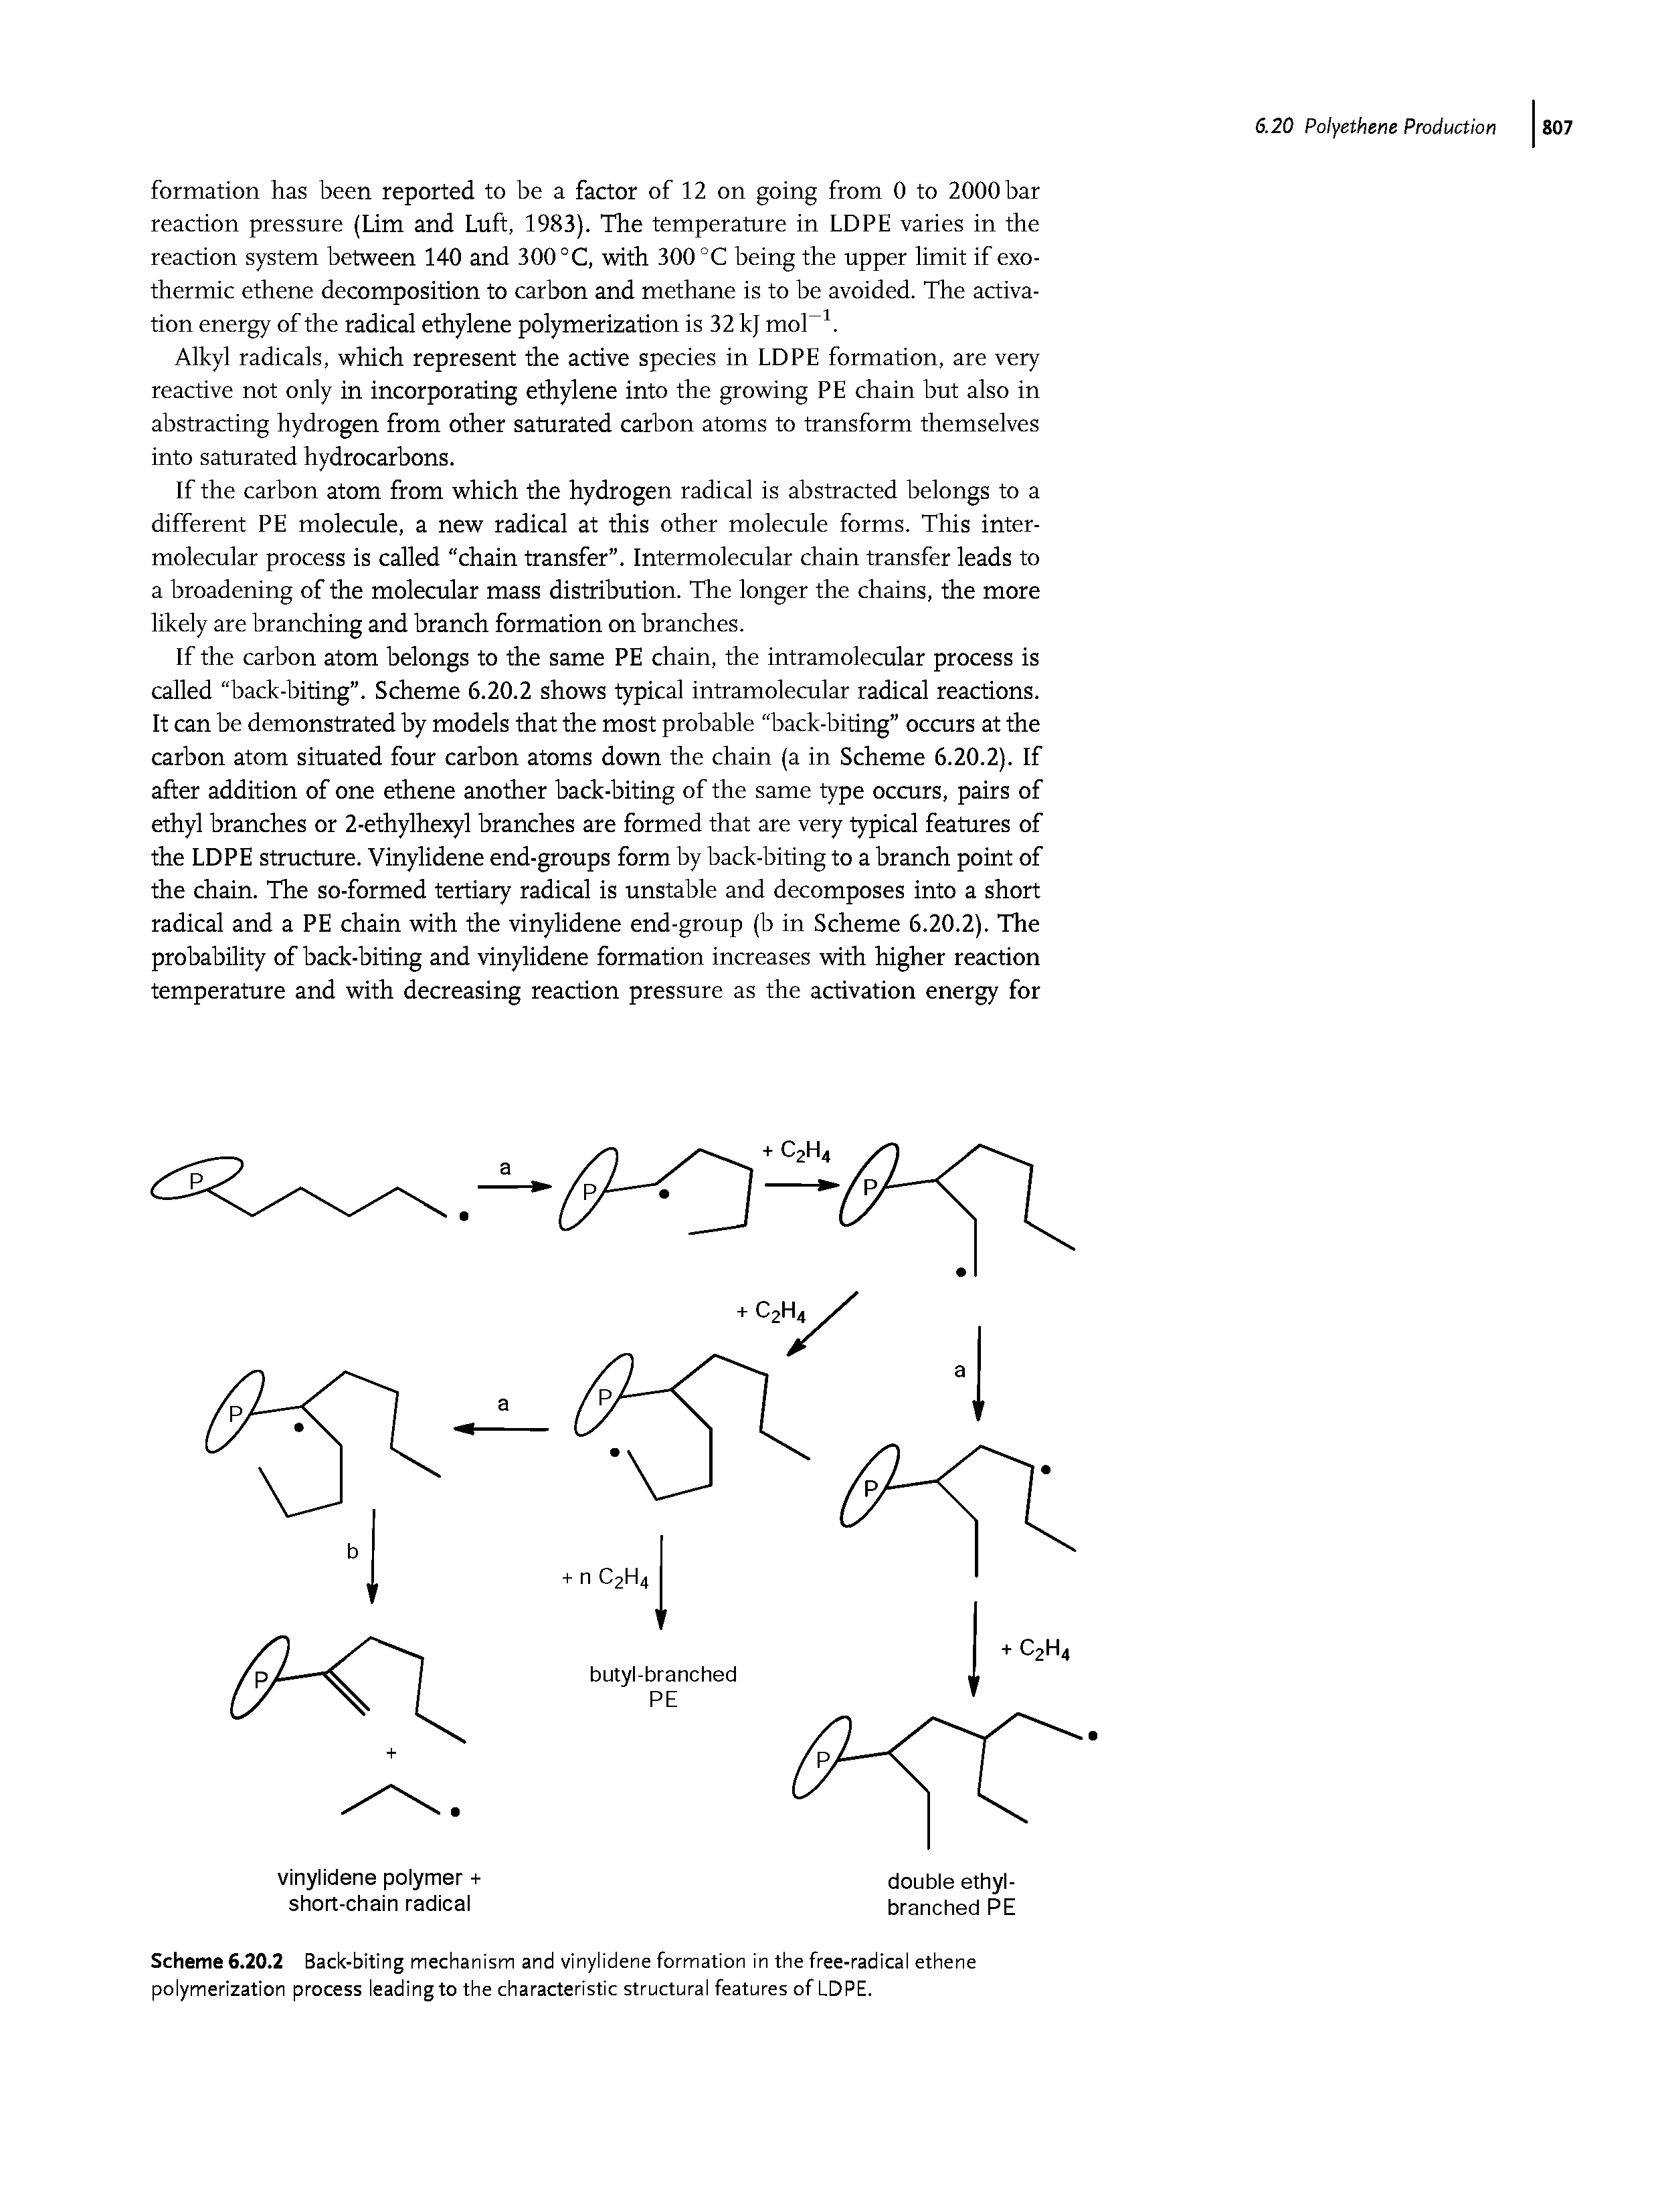 Scheme 6.20.2 Back-biting mechanism and vinylidene formation in the free-radical ethene polymerization process leading to the characteristic structural features of LDPE.